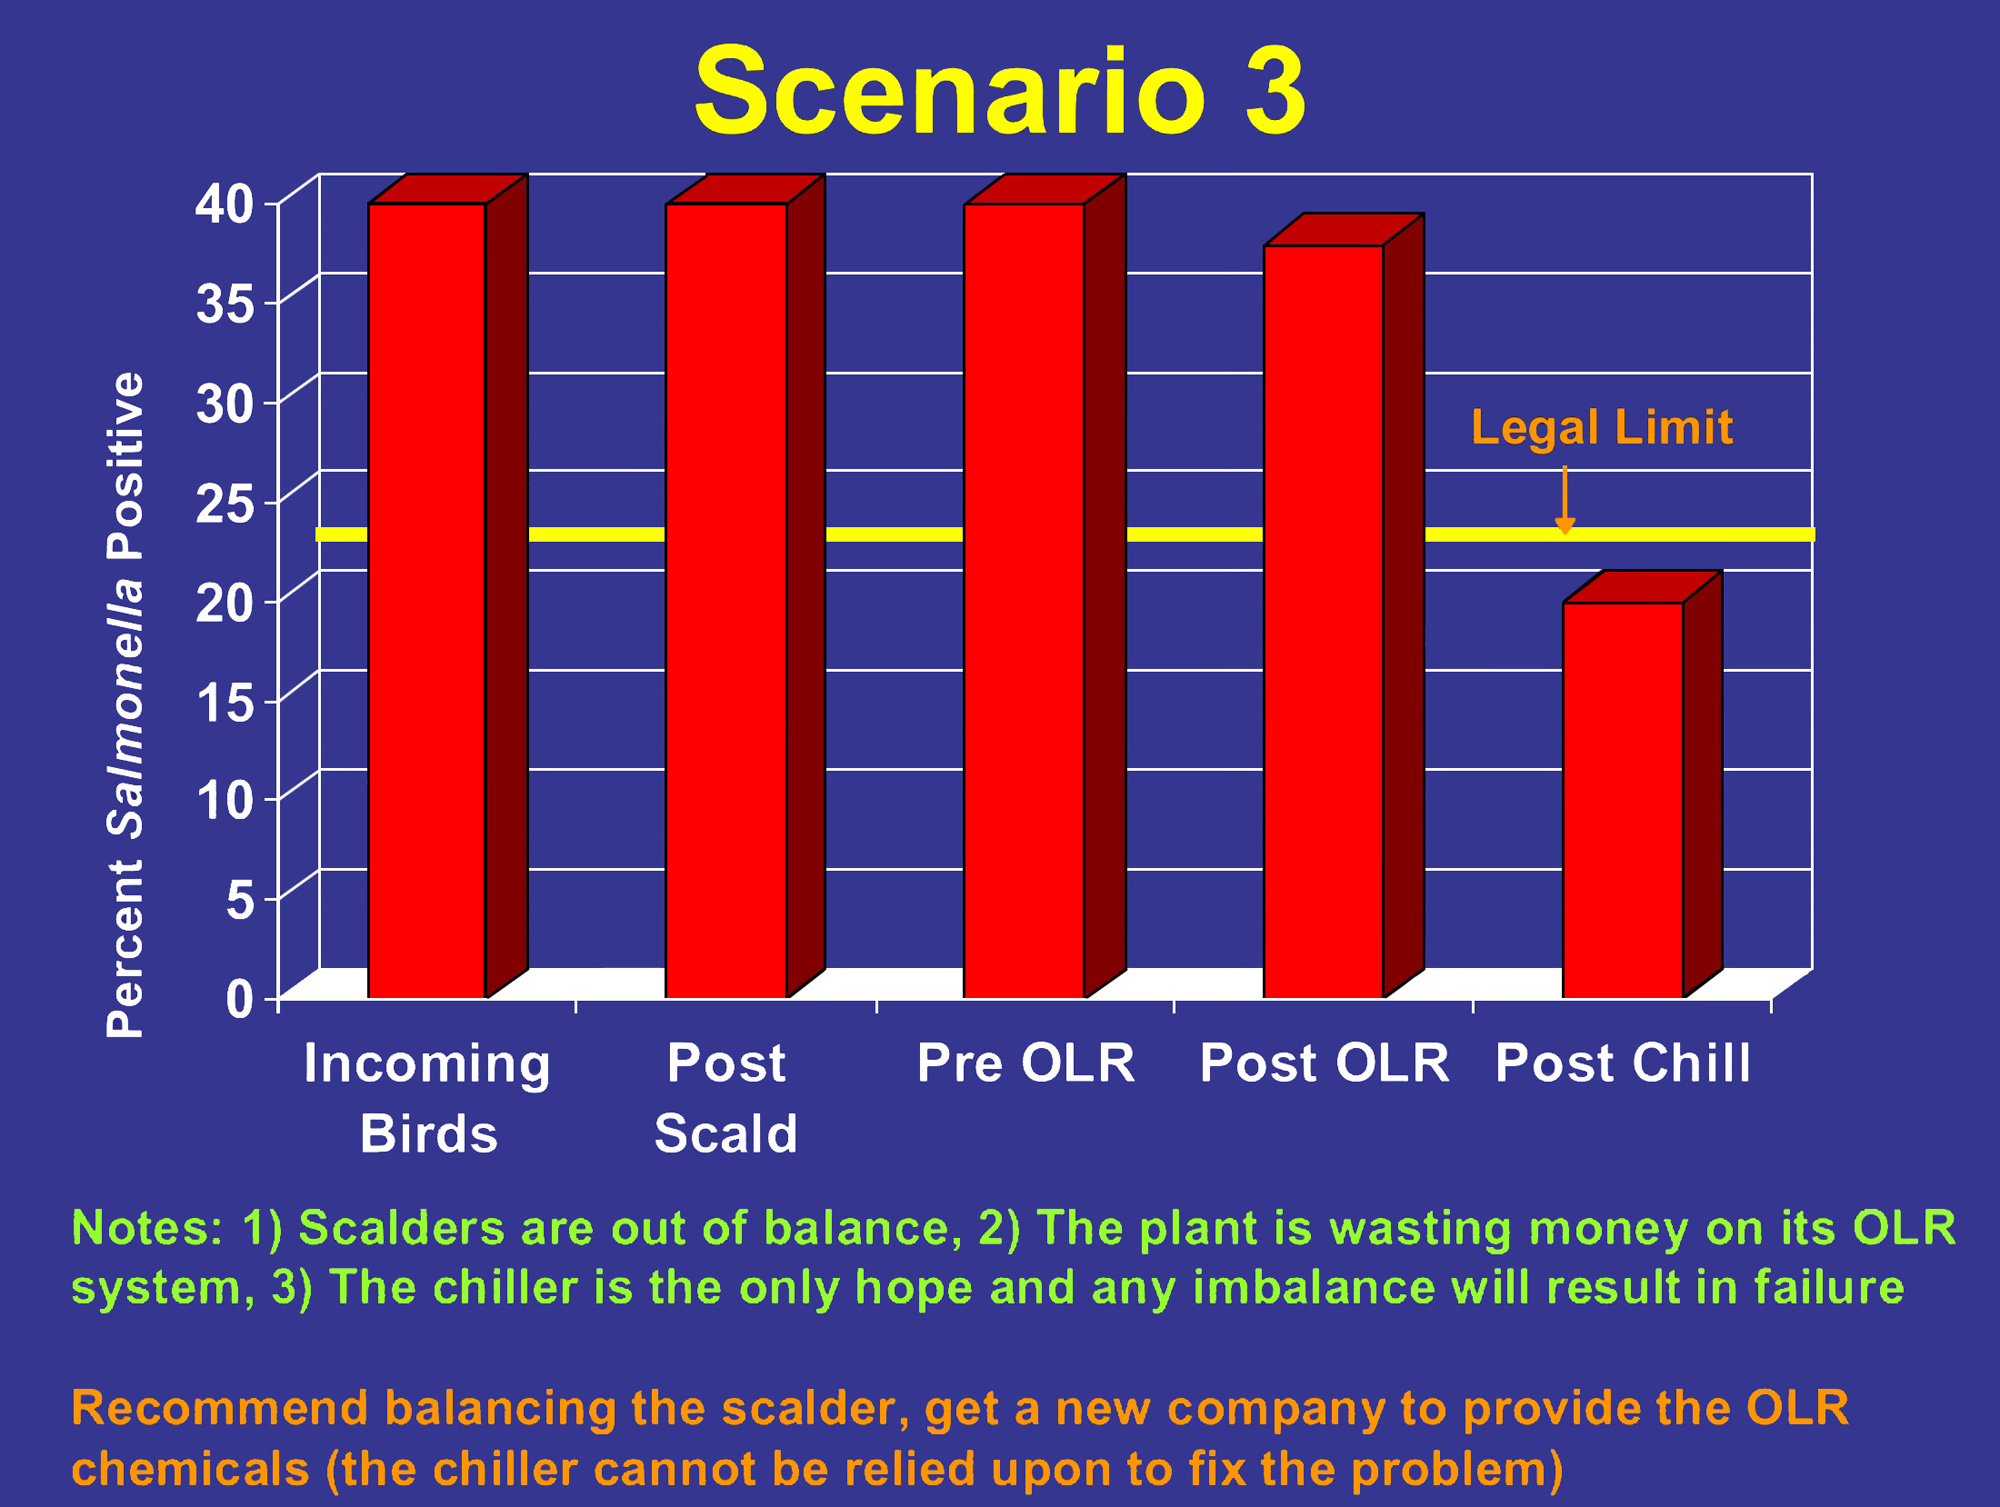 Bar graph showing percent of birds positive for salmonella throughout the plant process. 40% of incoming bird, post scald, and pre OLR are positive for Salmonella. Post OLR, it decreases slightly to around 37%. Post chill, it decreases to 20%, below the legal limit.